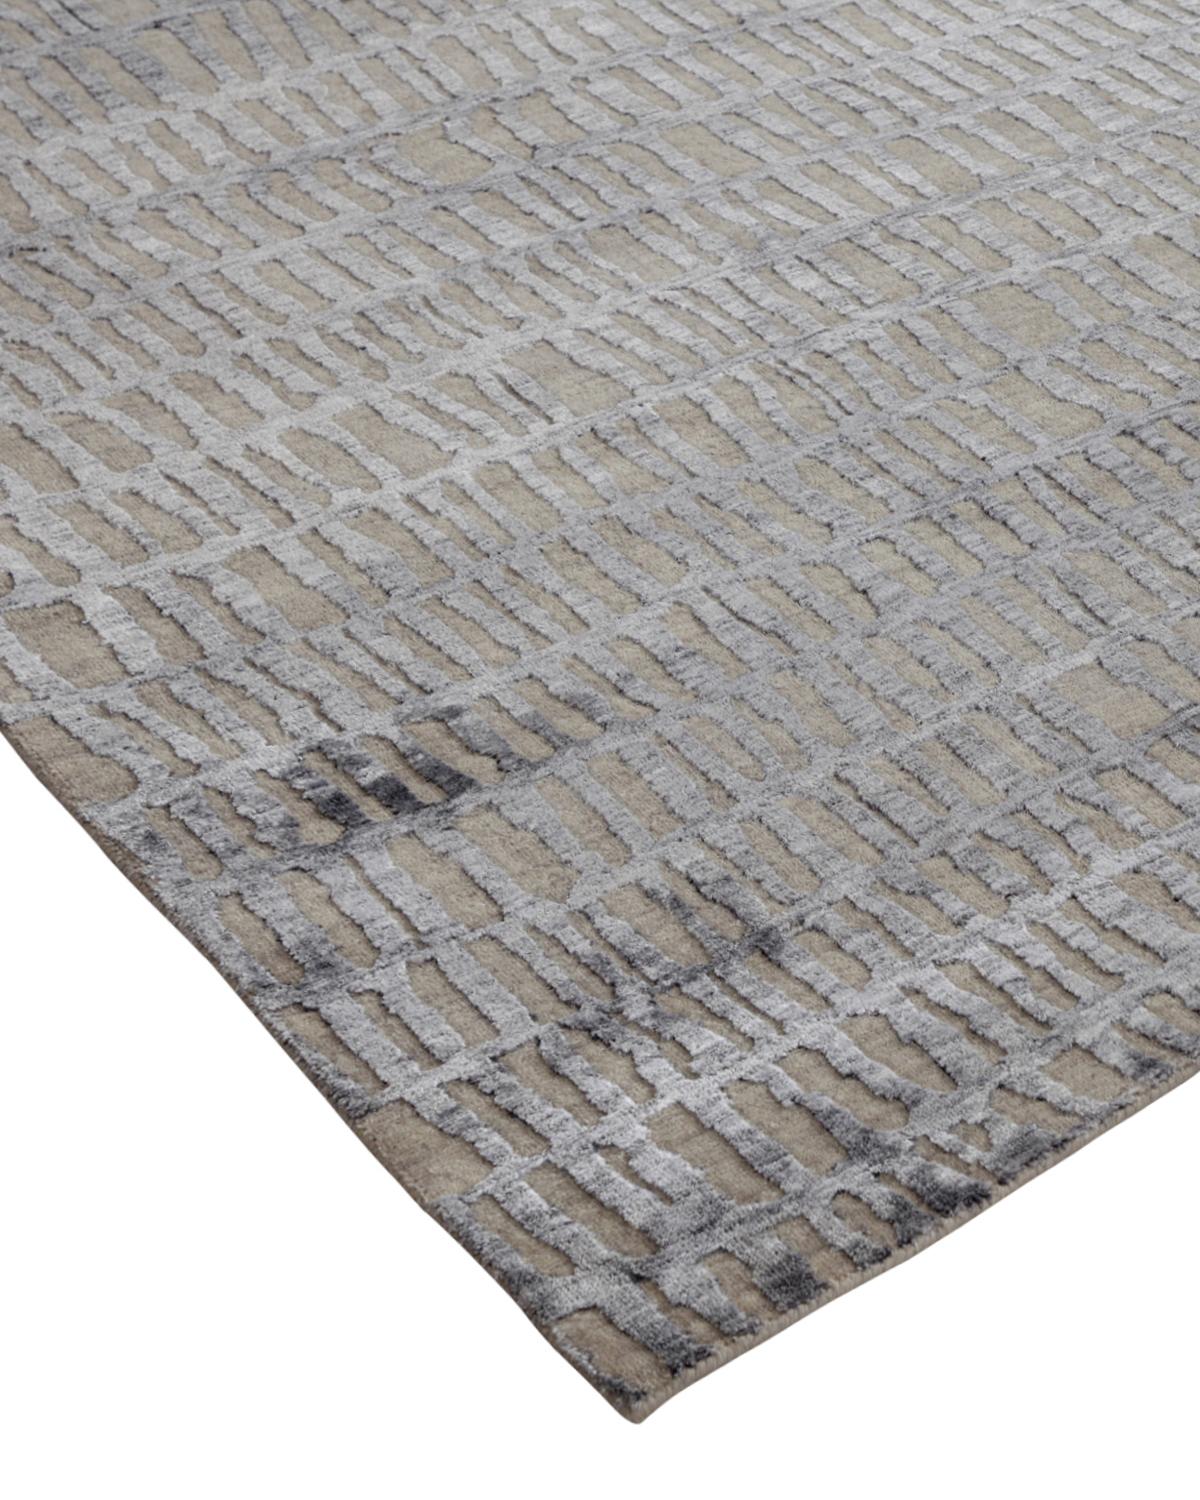 Using vintage inspired designs and contemporary, neutral color stories and distressed detailing, the Erase collection offers Classic elegance with a modern twist. Effortless, chic, and functional, this rug is perfect for adding a glamorous touch to